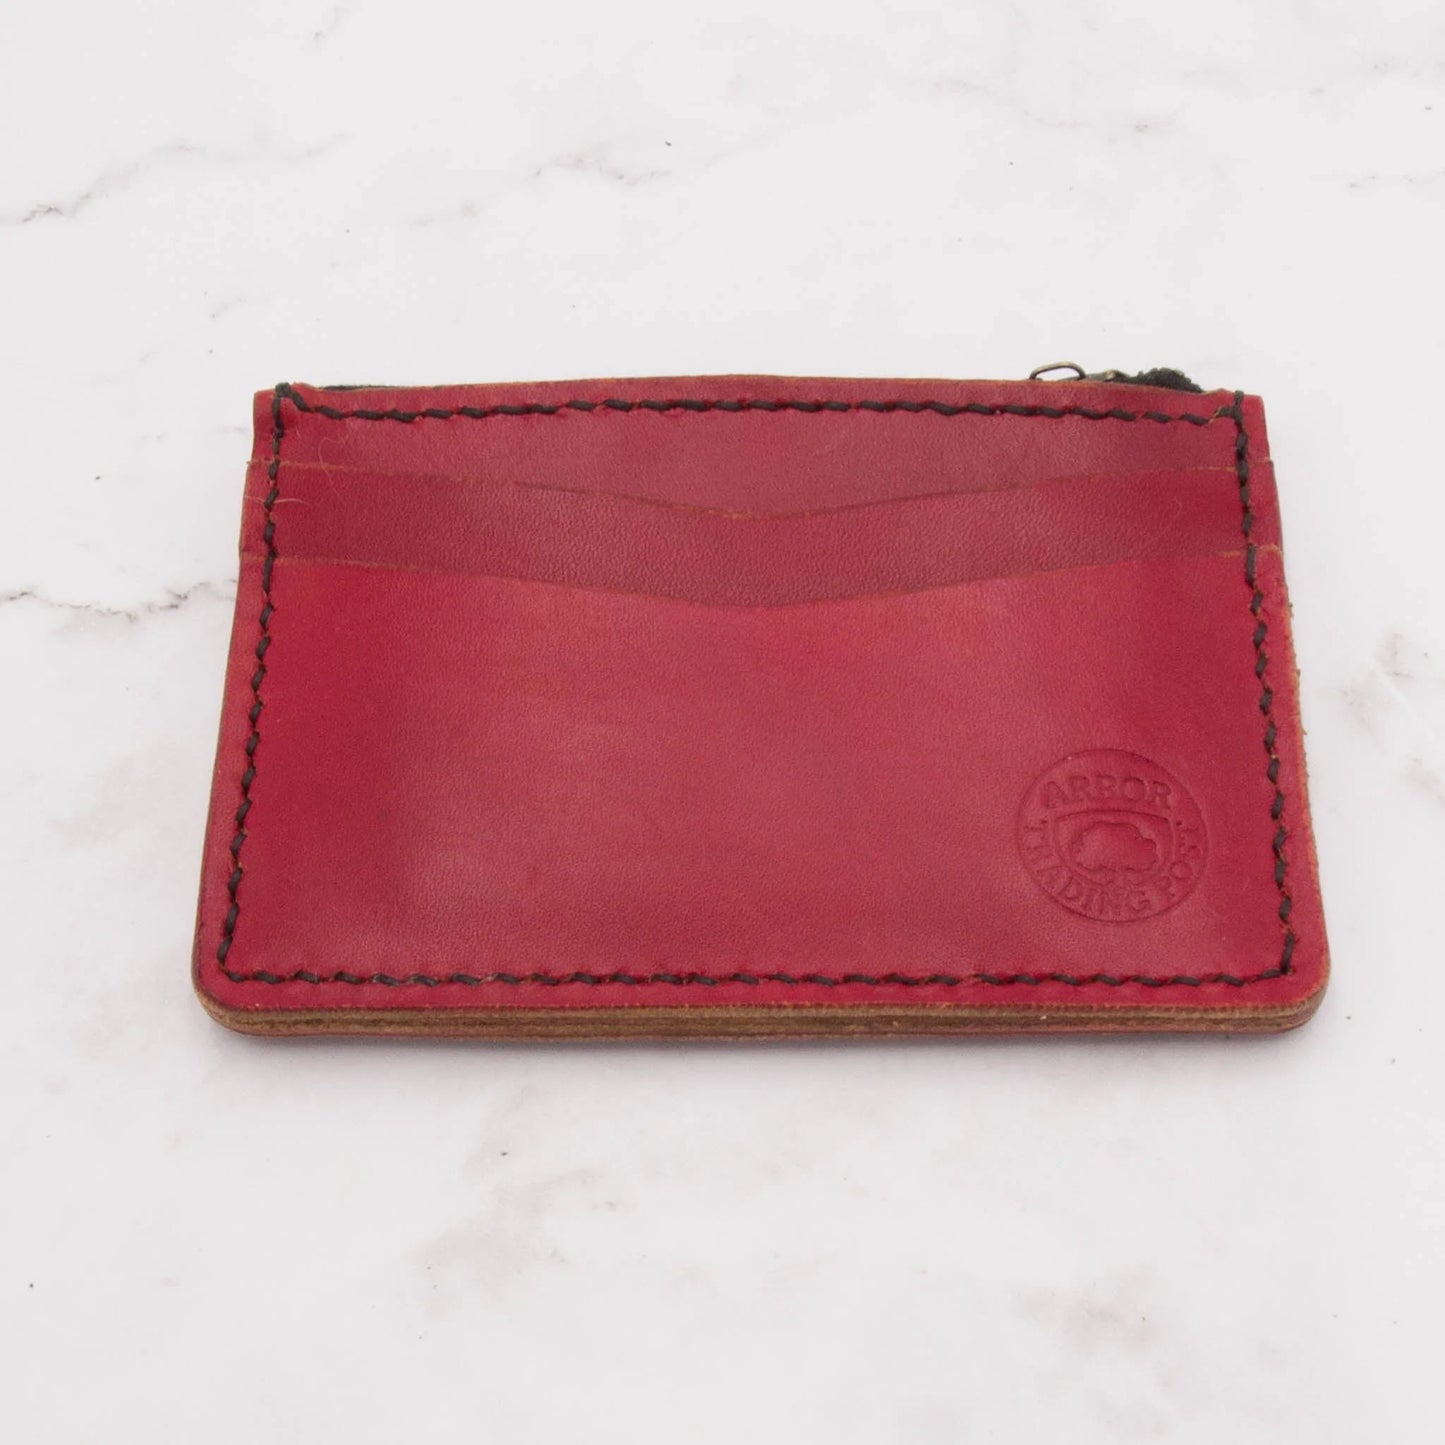 Arbor Trading Post Wallet Handcrafted Leather Wallet with ID Window and Zipper